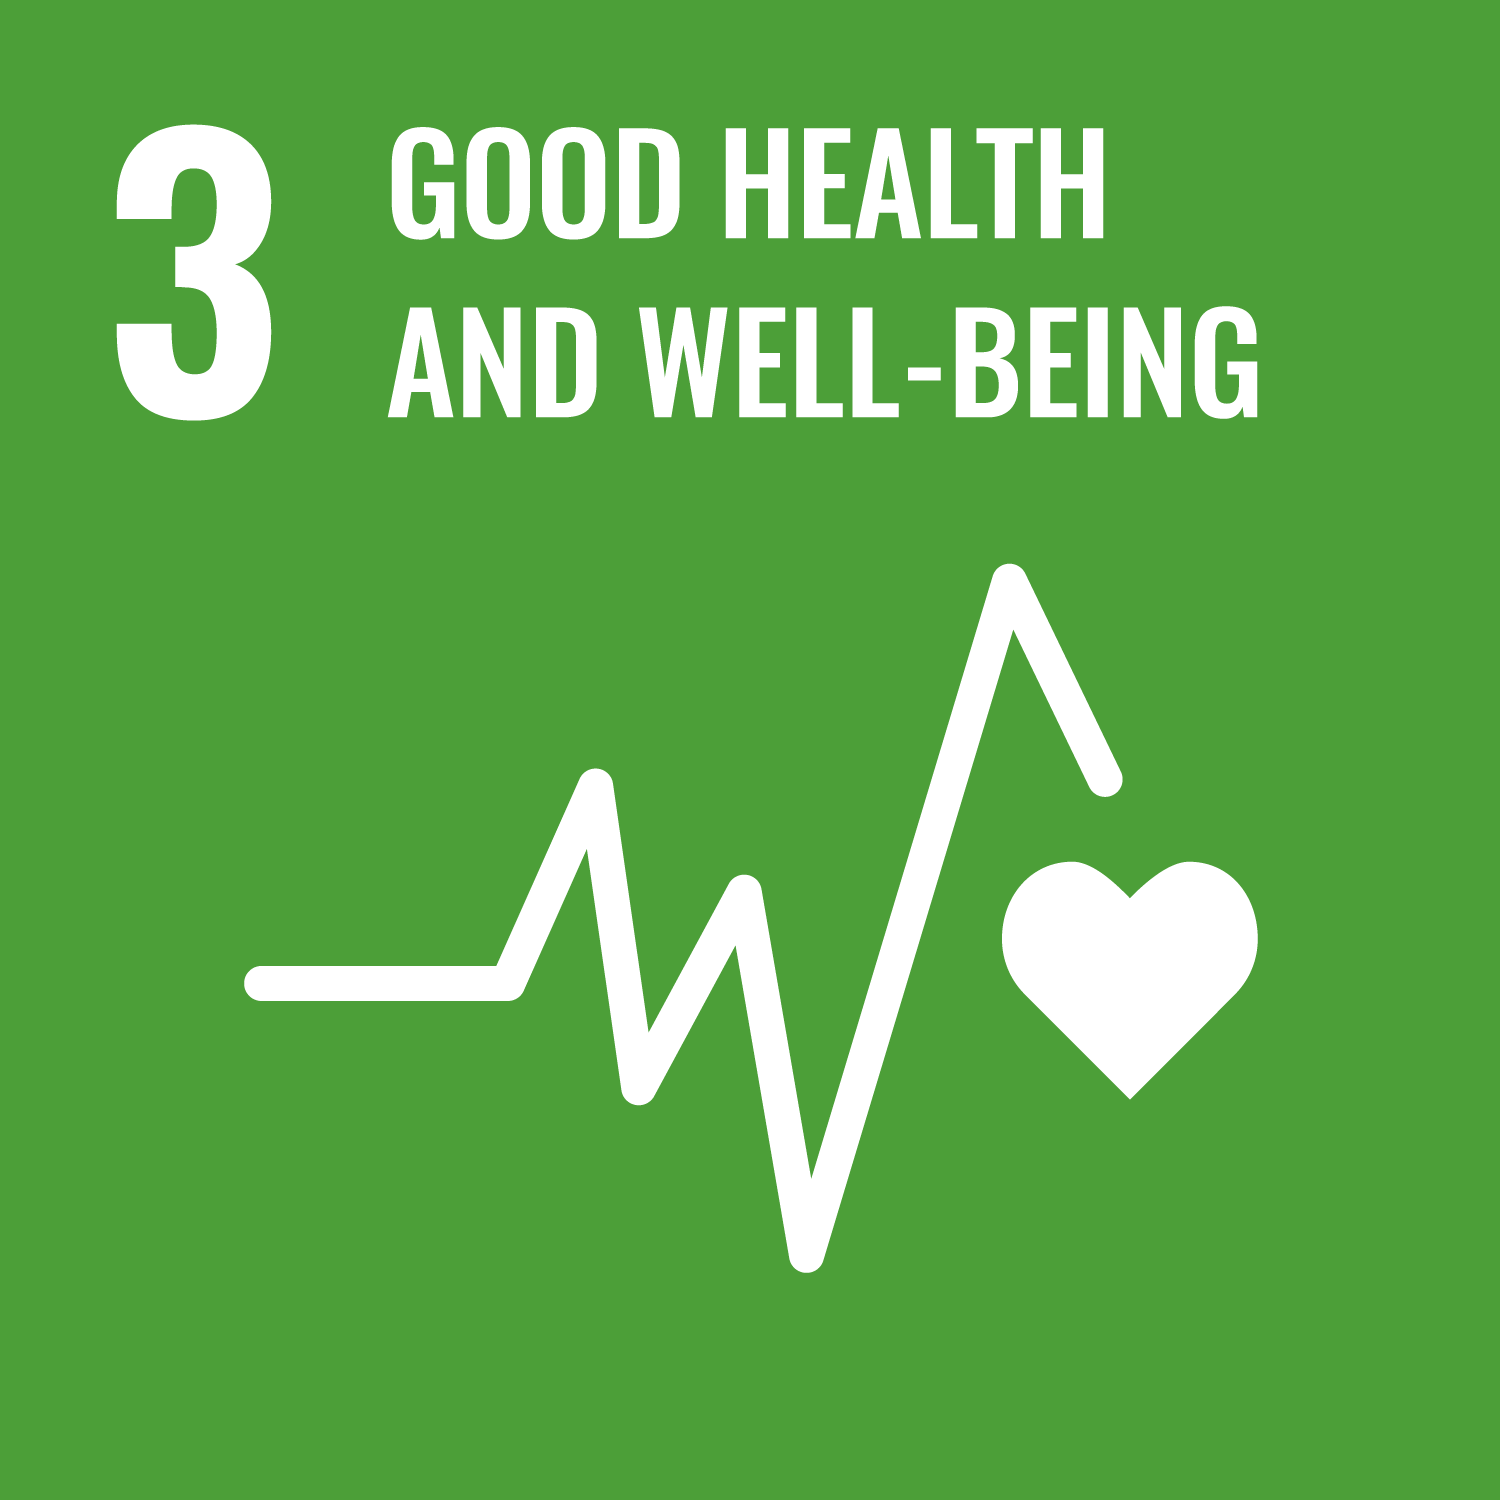 Good Health and Well-Being (SDG3)